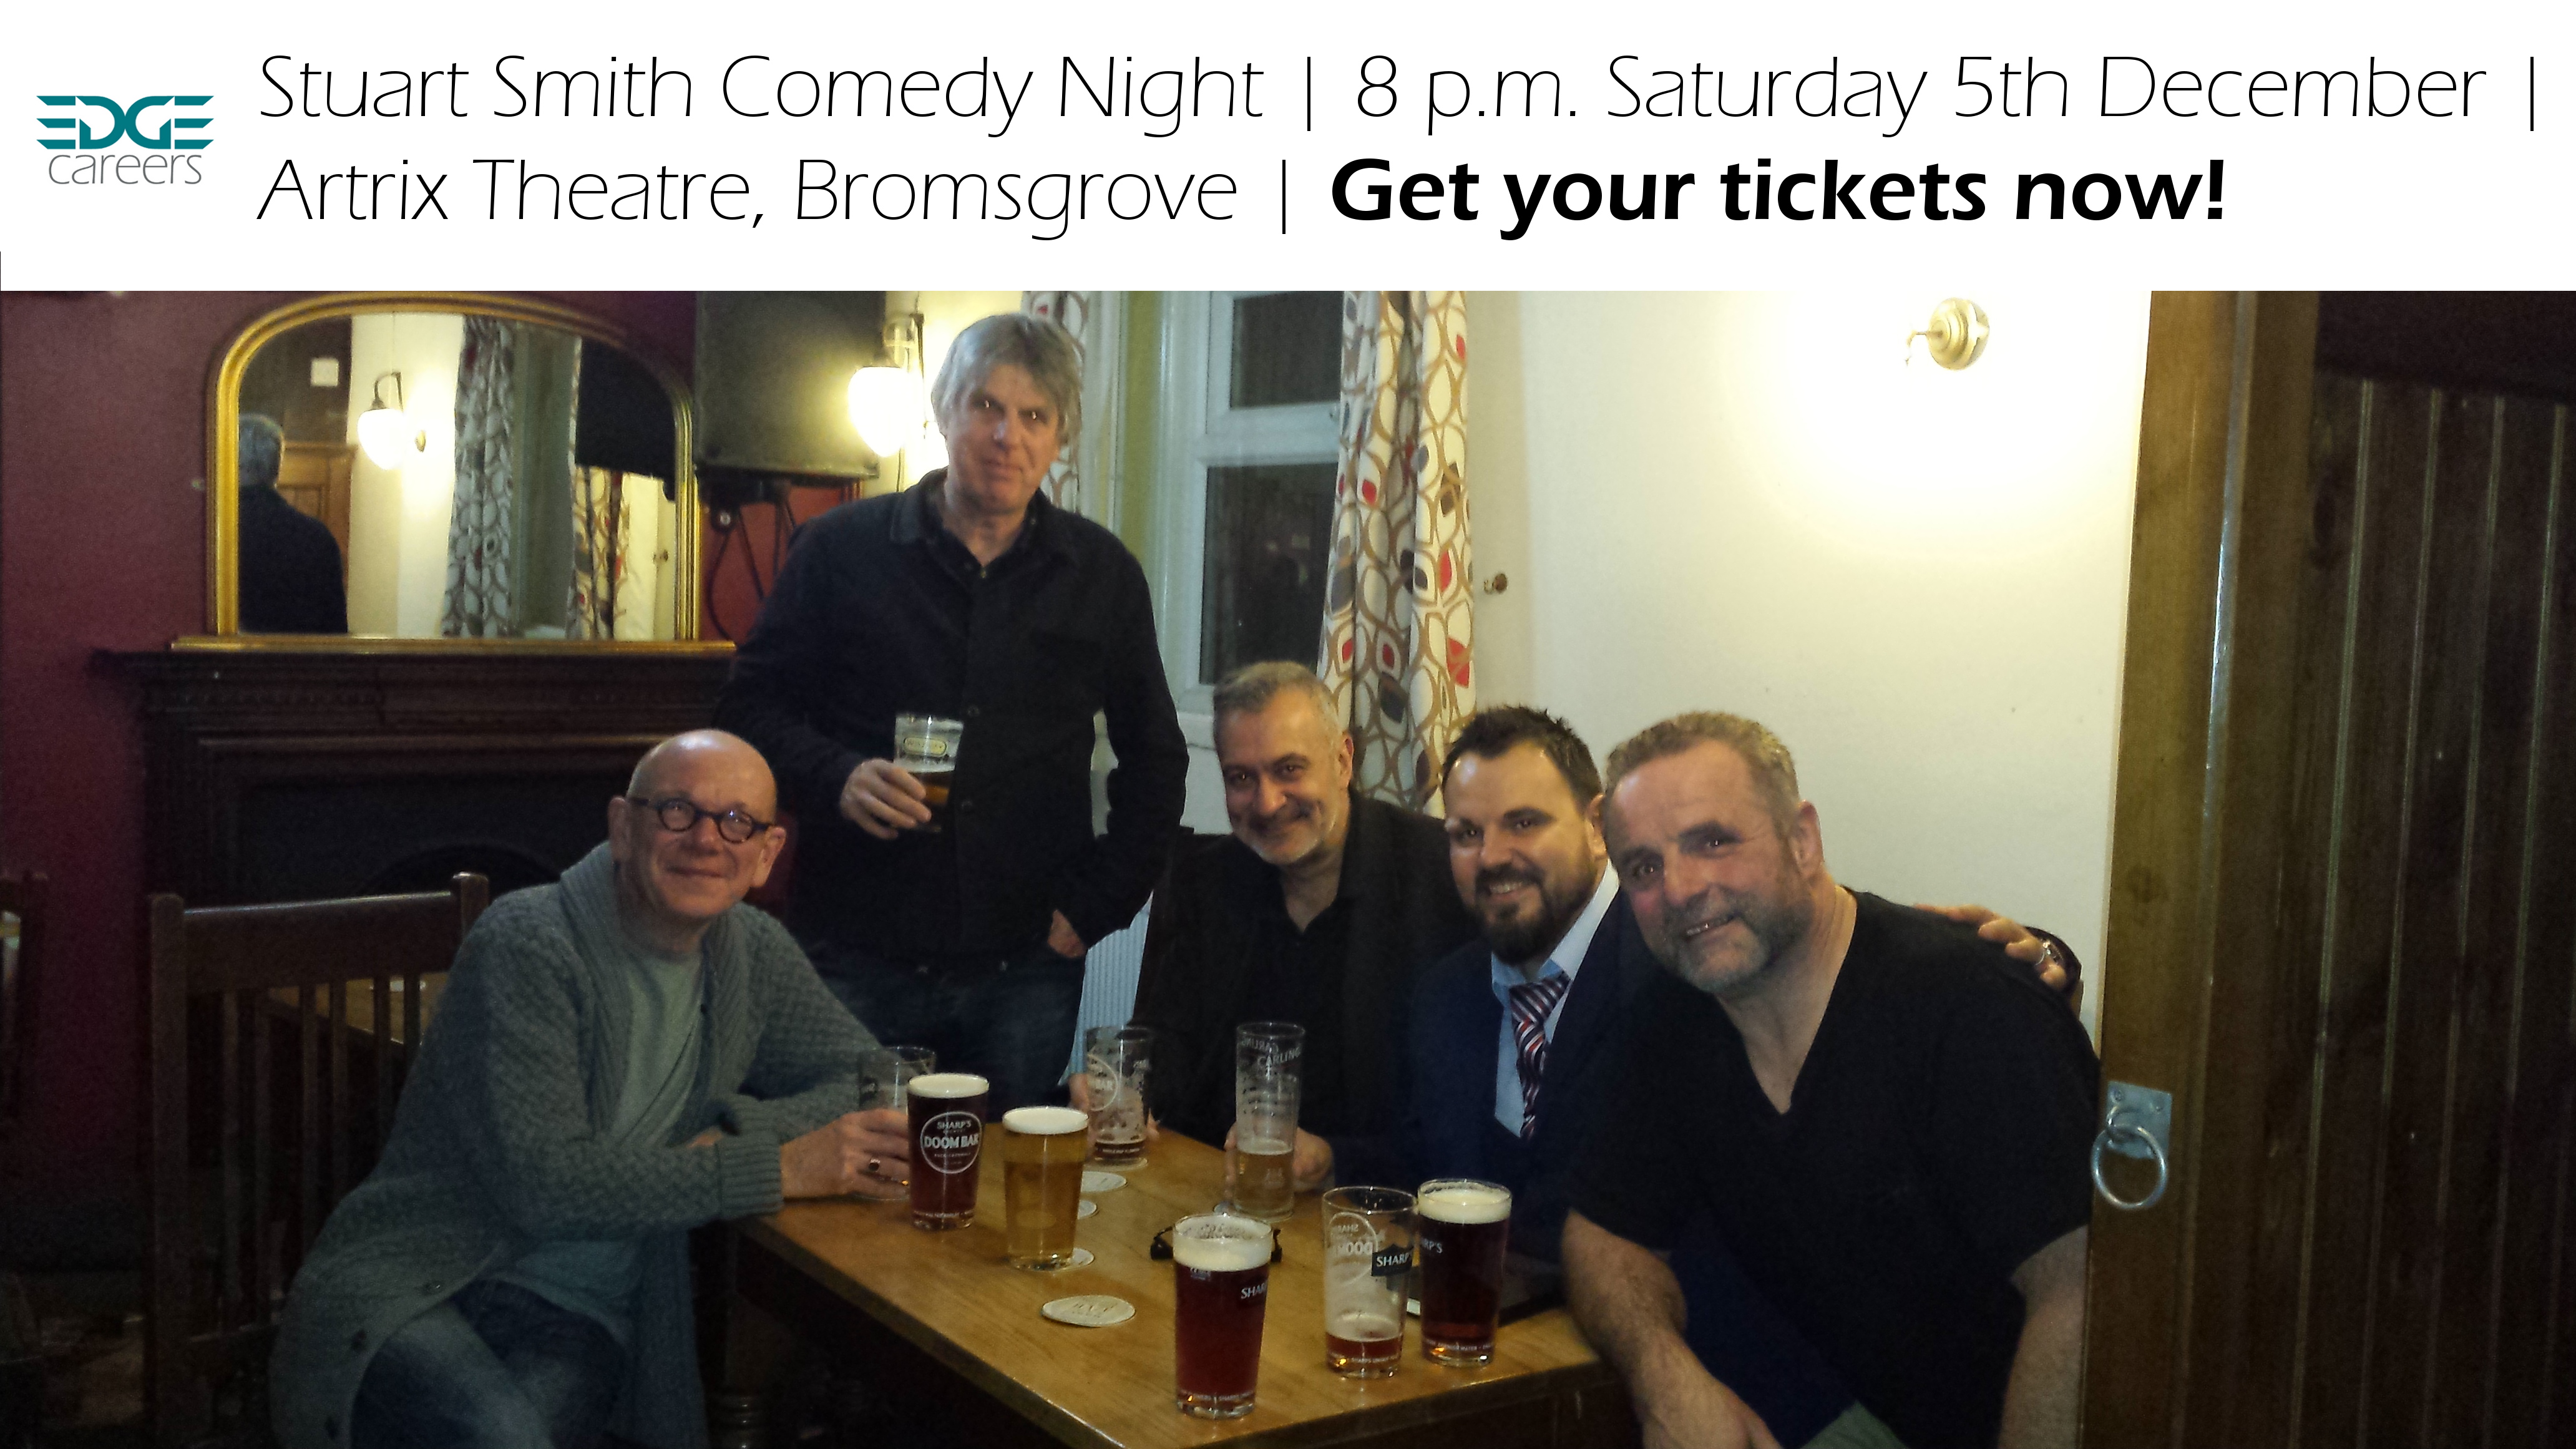 Stuart Smith and Comedy Chums